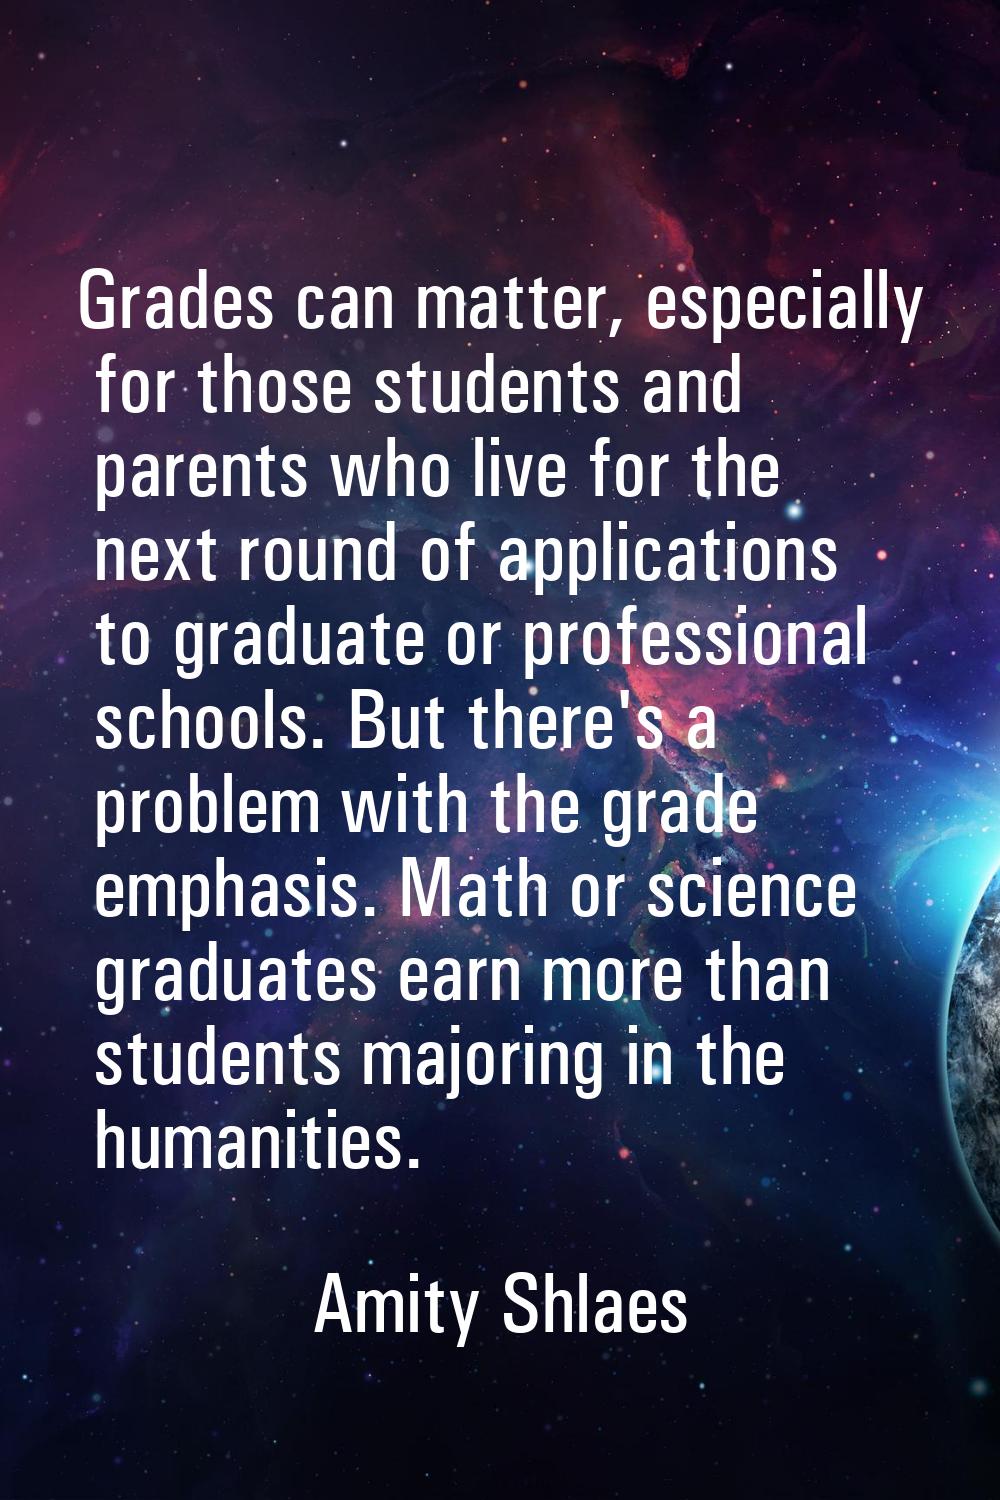 Grades can matter, especially for those students and parents who live for the next round of applica